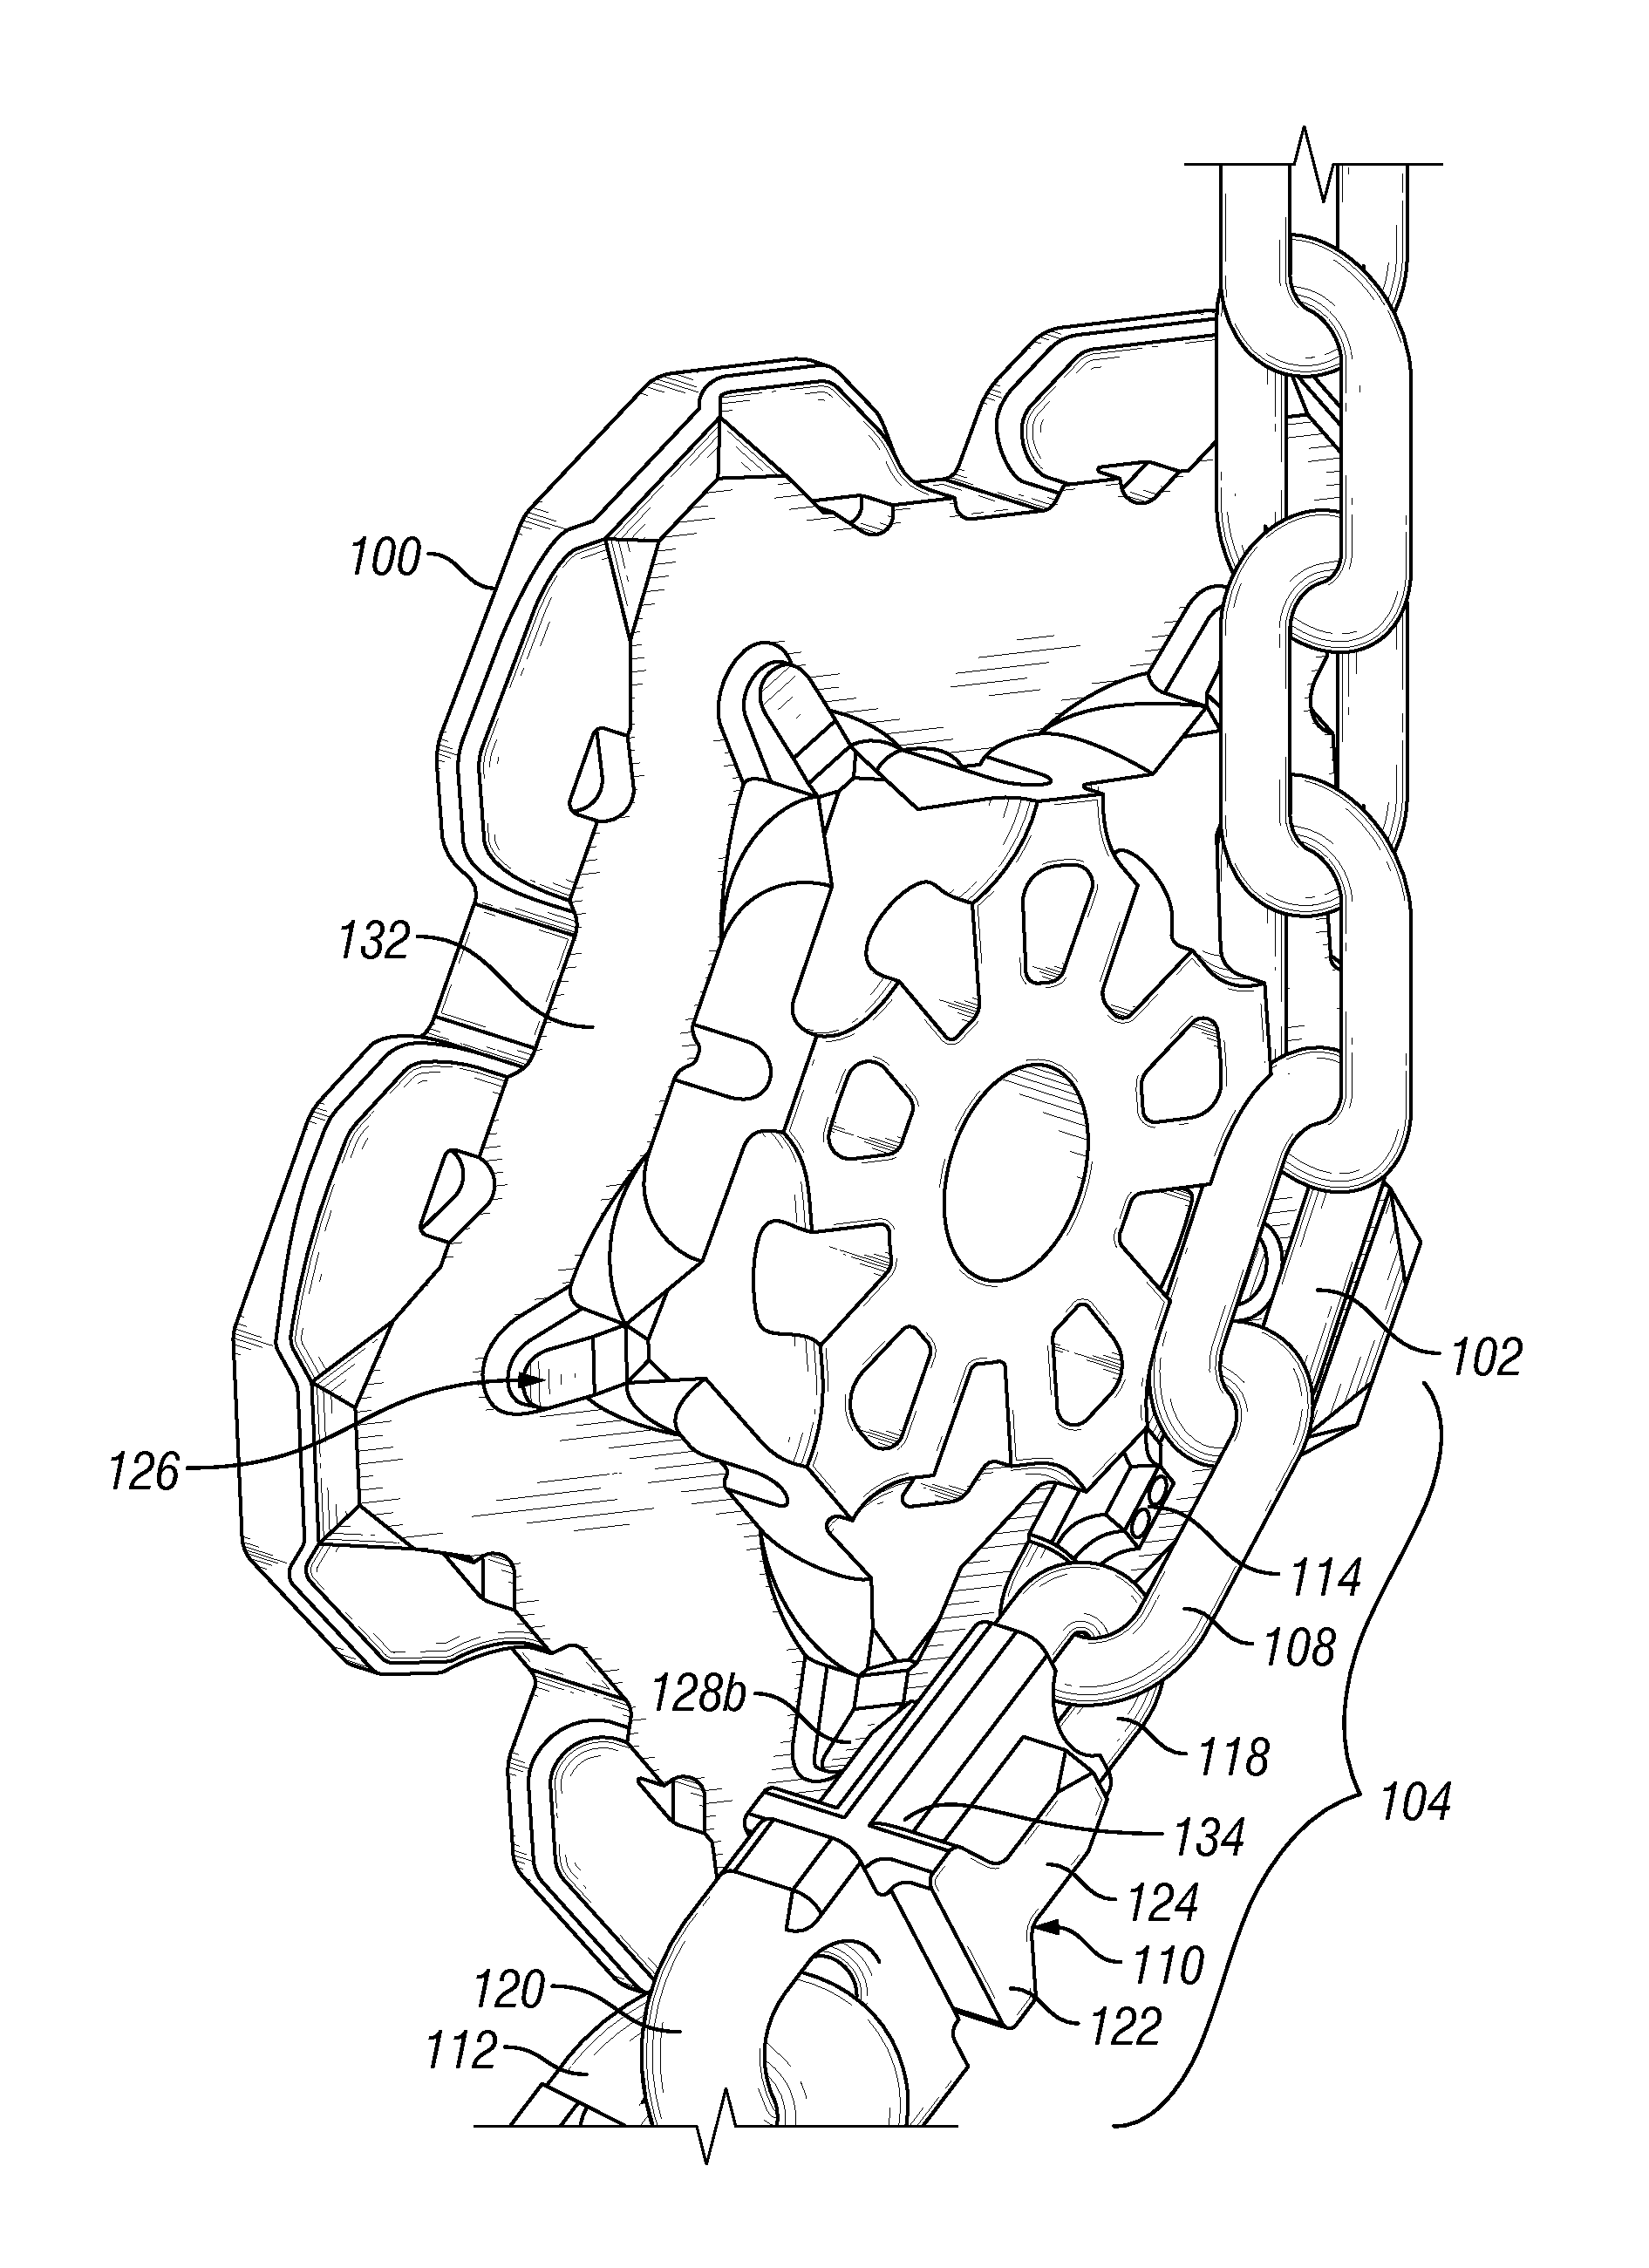 Mooring chain connecting link